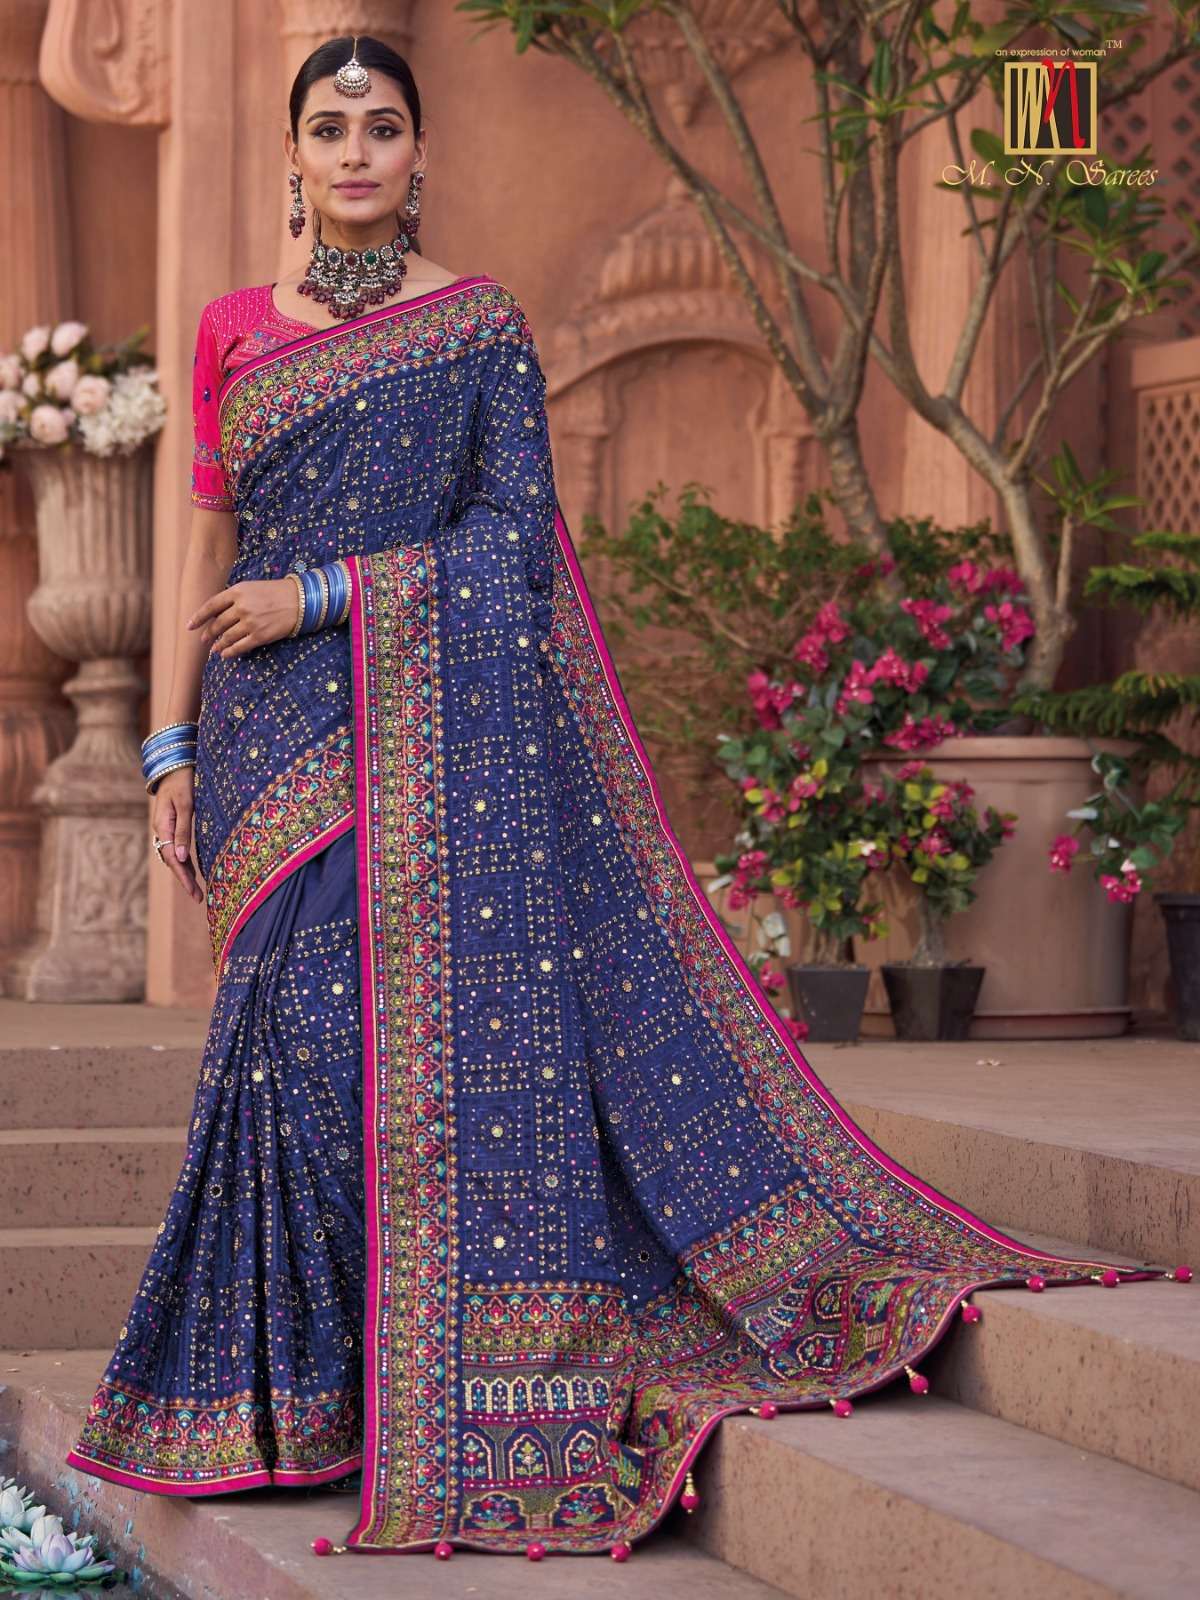 Different Types of Traditional Saree Draping Styles in India